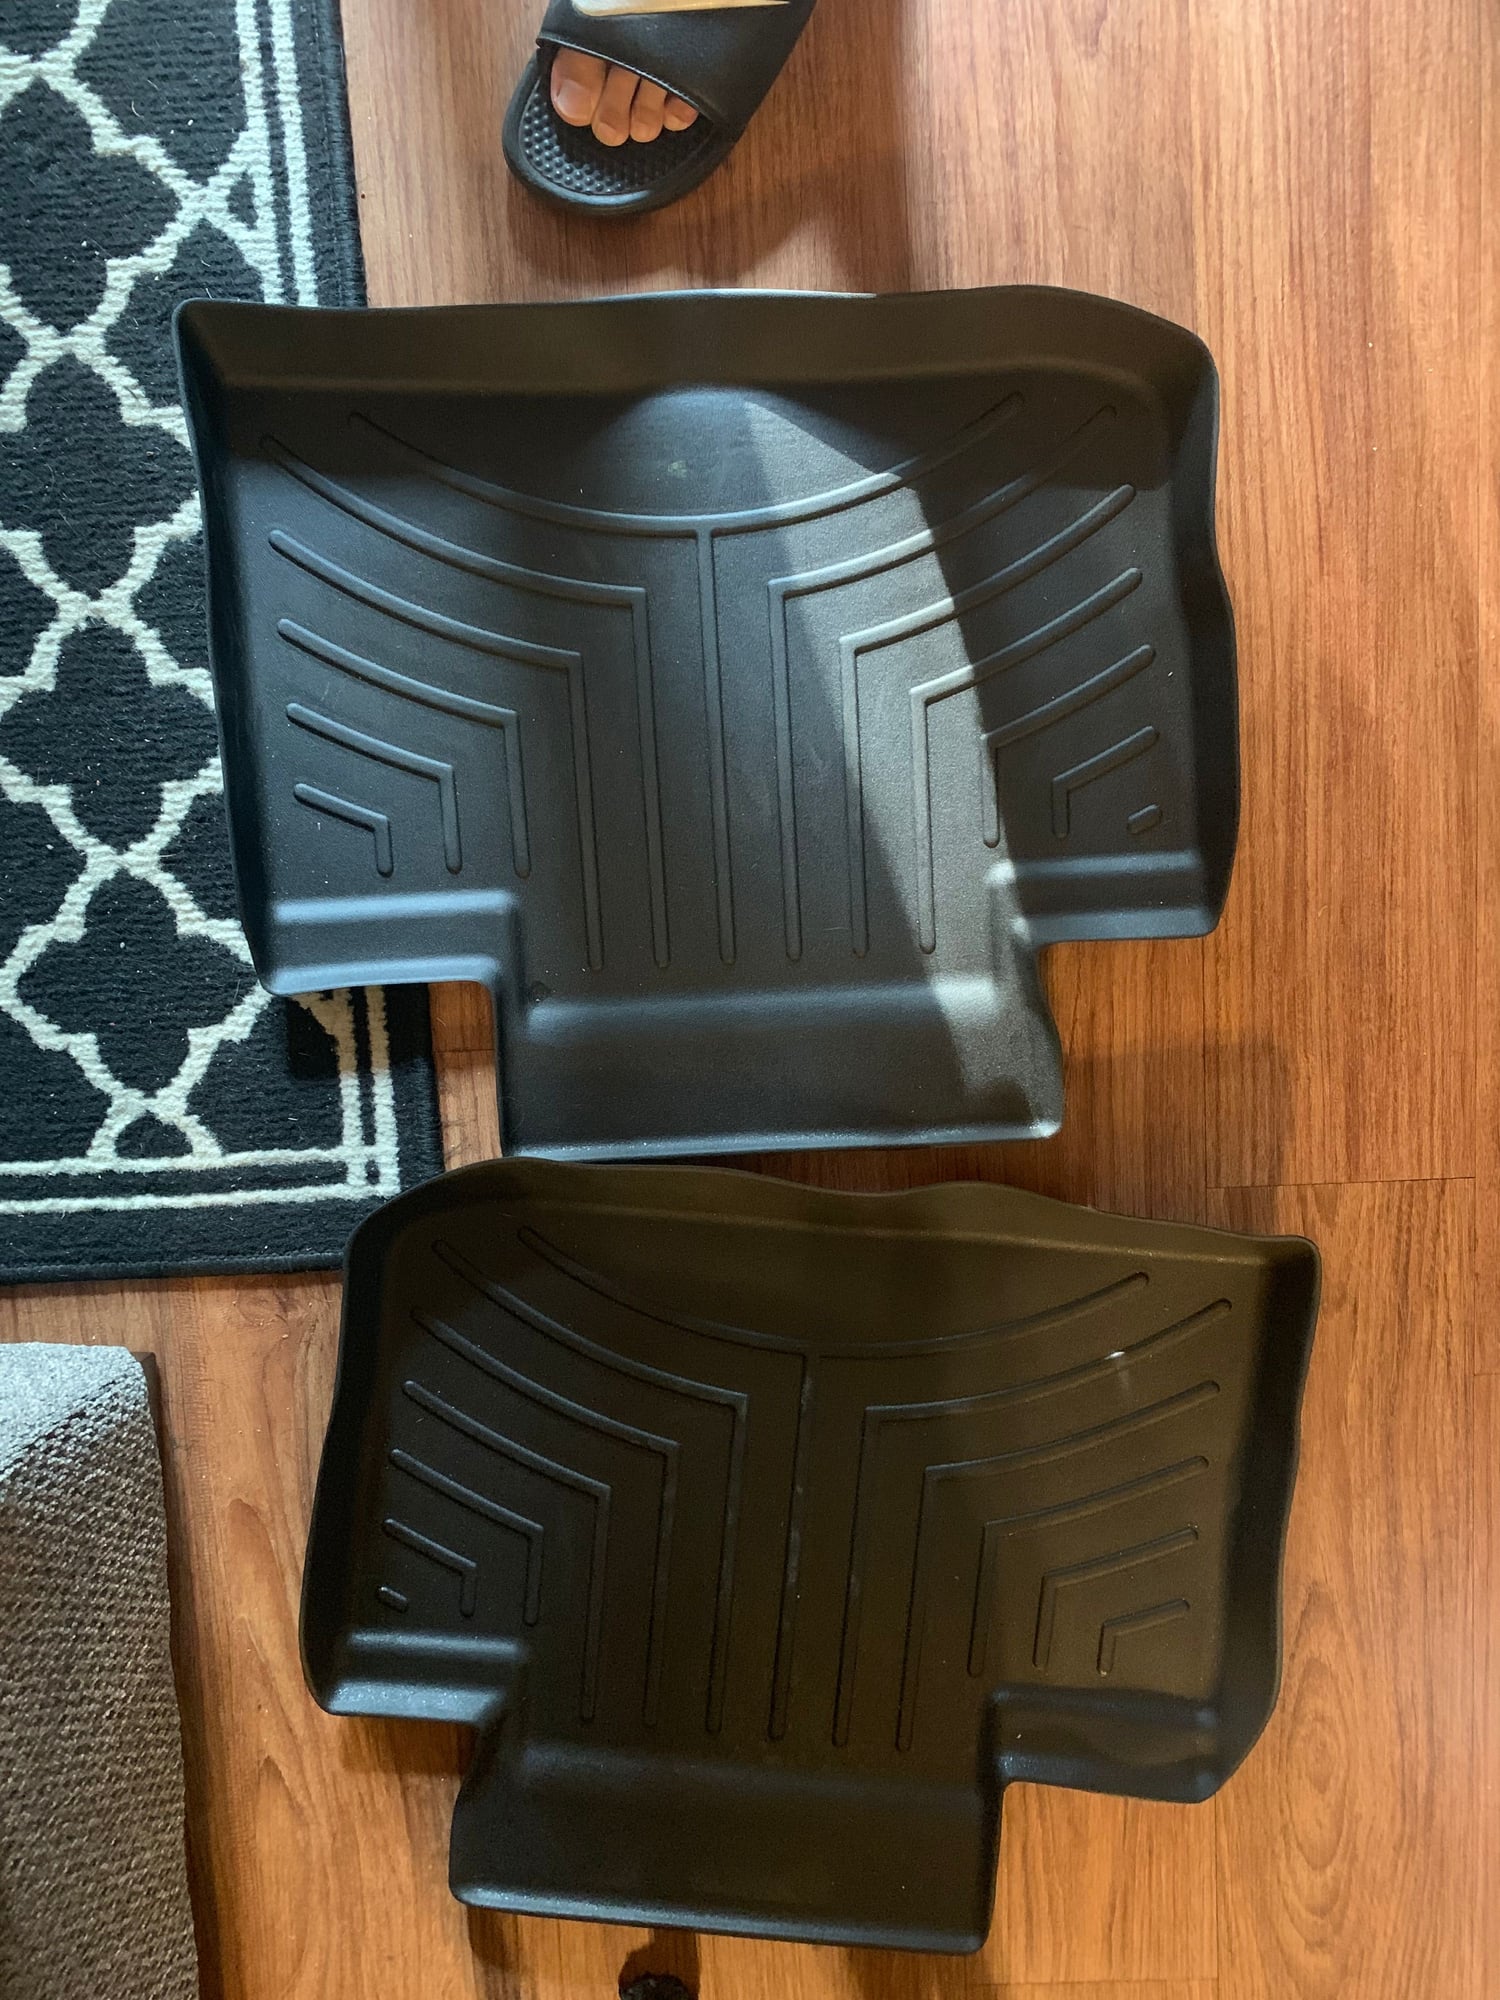 Interior/Upholstery - WeatherTech Mats Front and Rear - Used - 2015 to 2019 Lexus IS350 - Rialto, CA 92376, United States